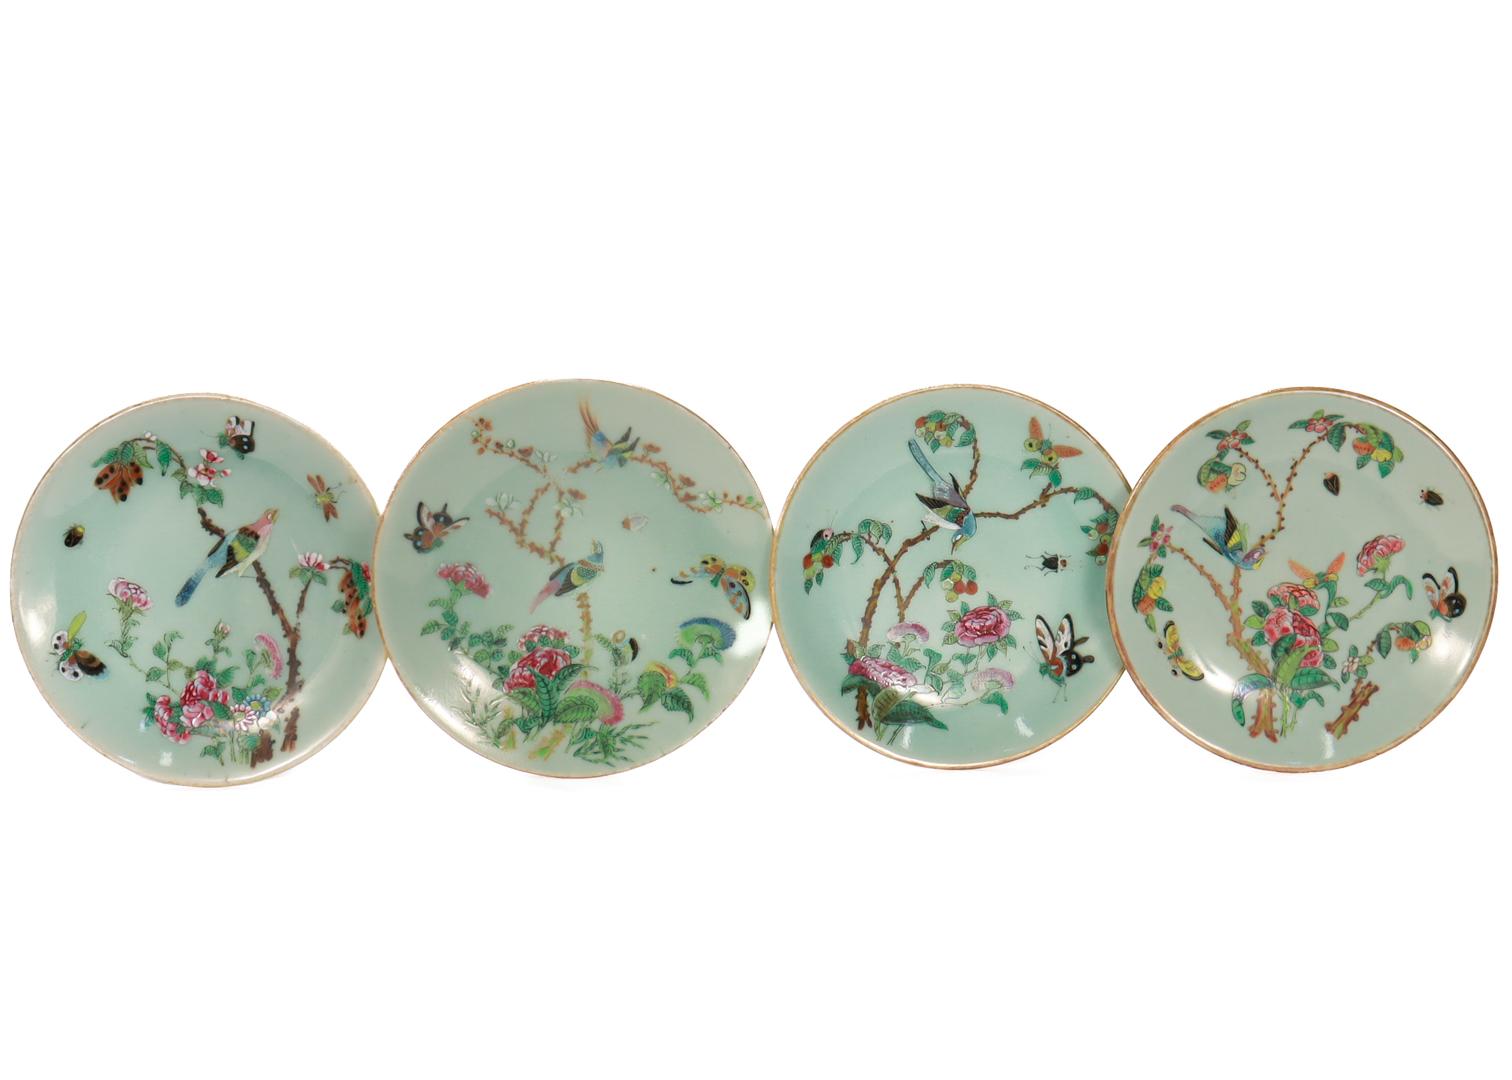 Set of 4 Chinese Export Porcelain Celadon Plates For Sale 4